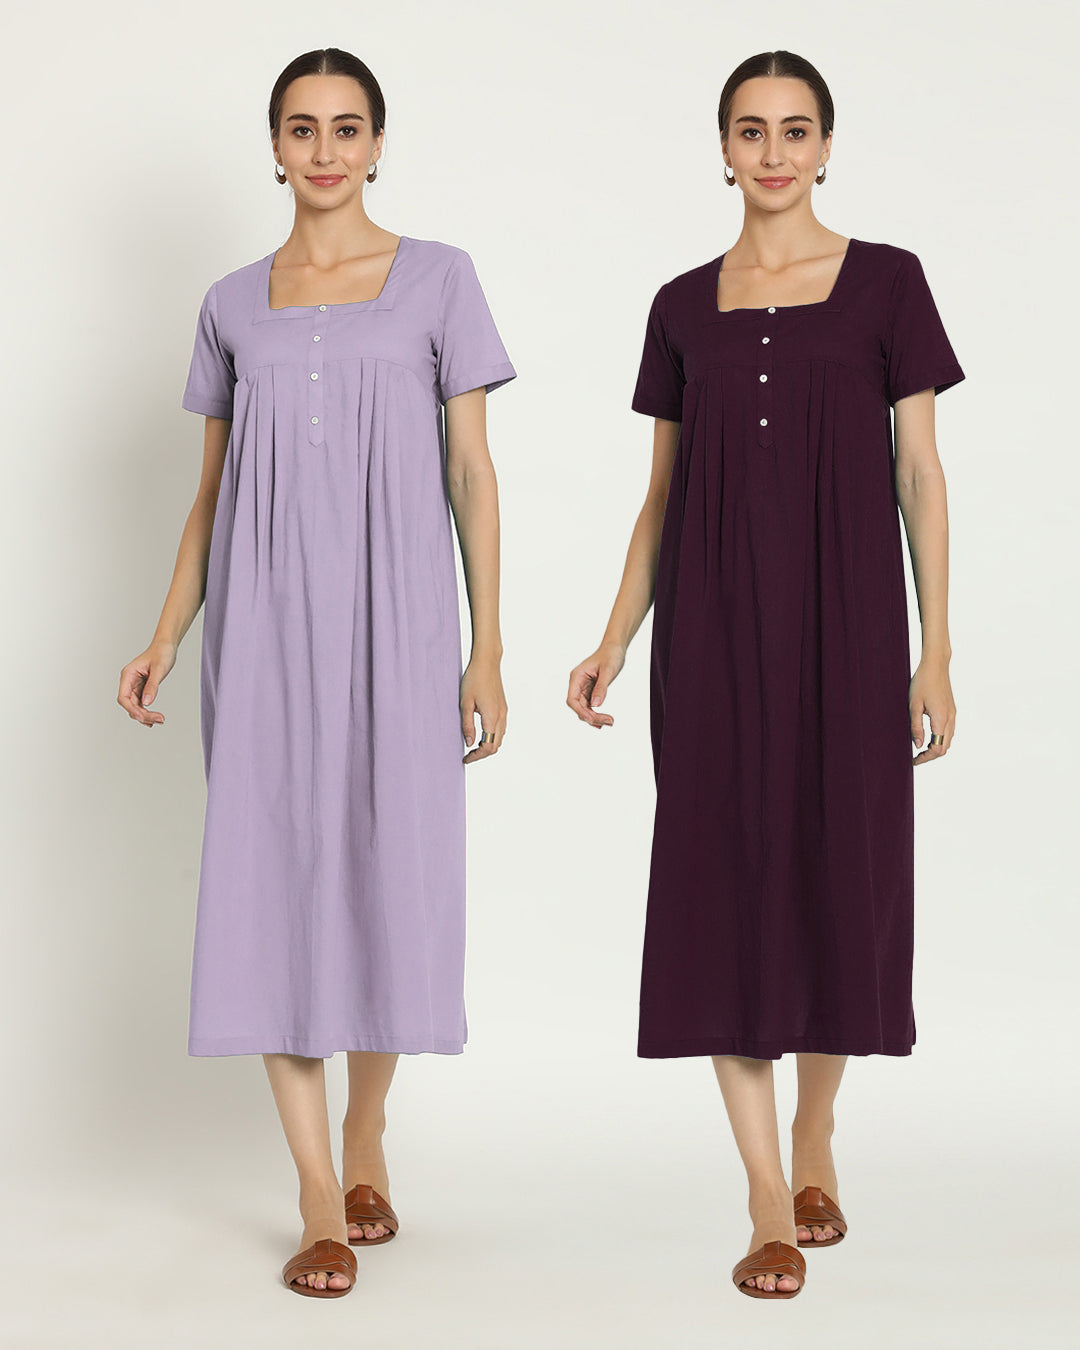 Combo: Lilac & Plum Passion Square Neck Serenity Nightdress- Set Of 2